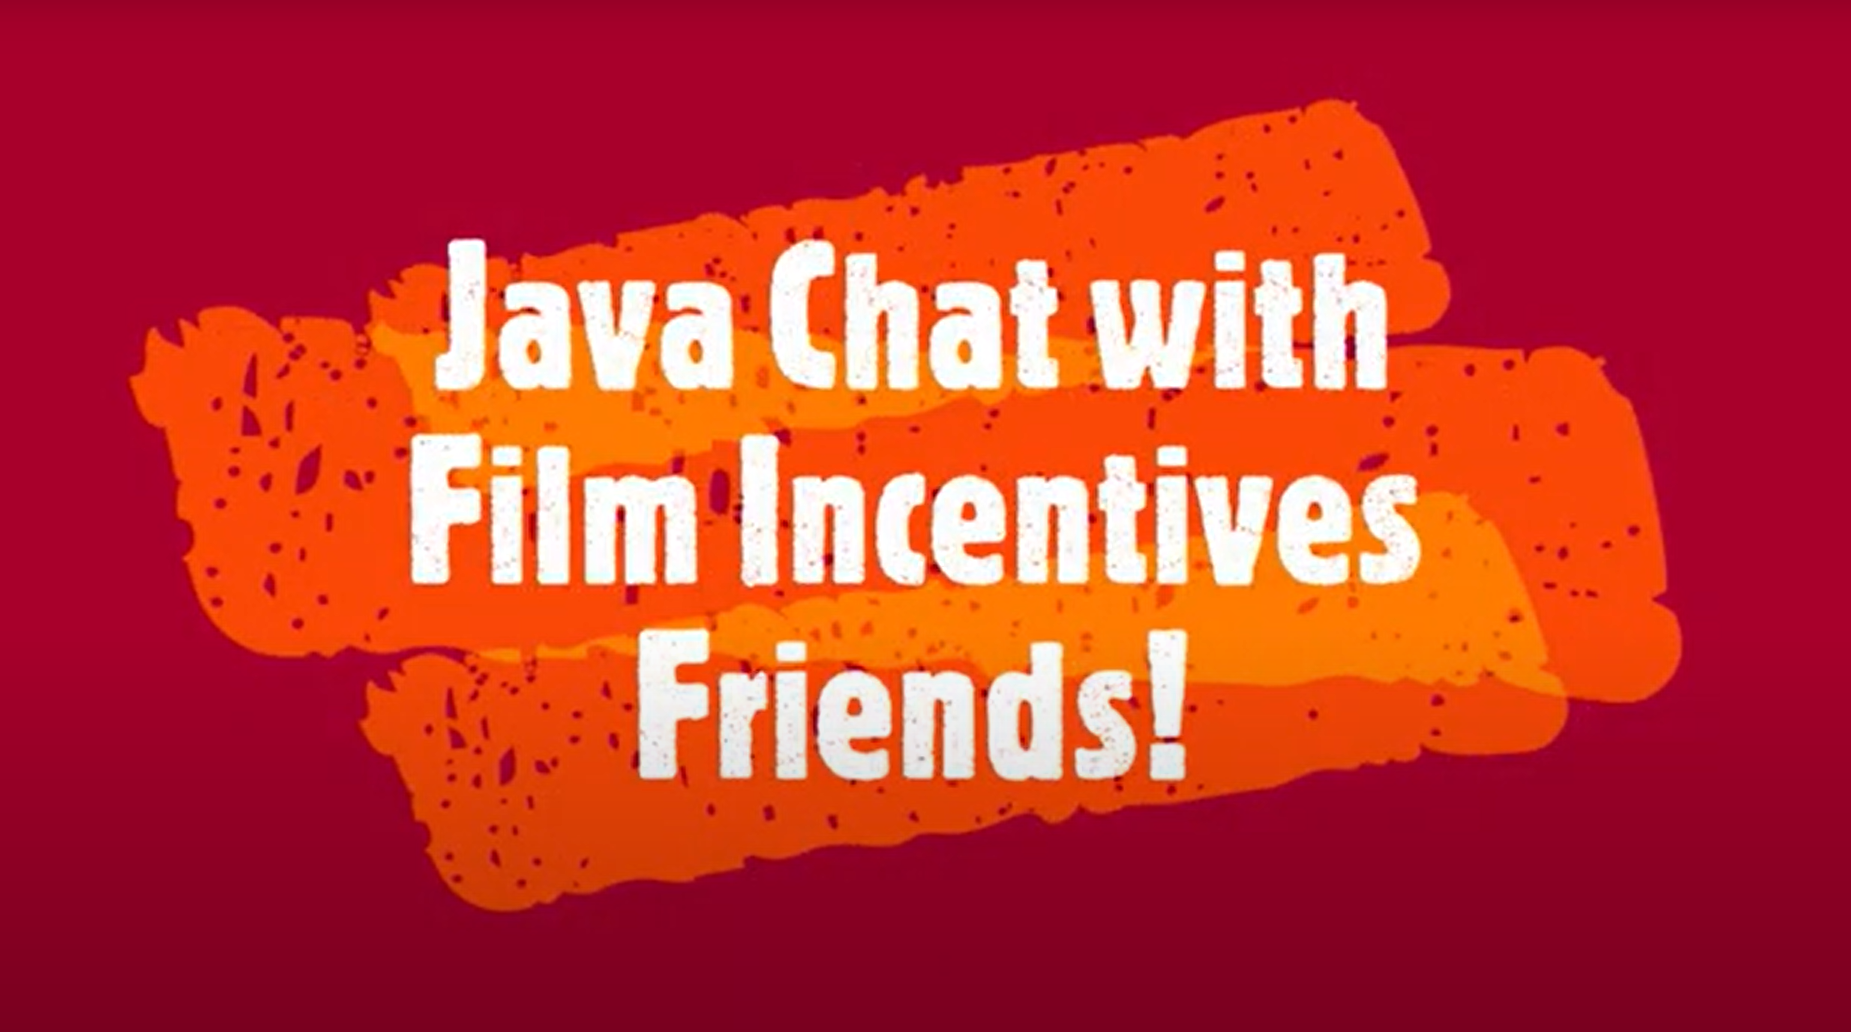 Monarch’s Marco Cordova Hosts New Video Series Java Chat with Film Incentives Friends: Introductions & Hot Topics